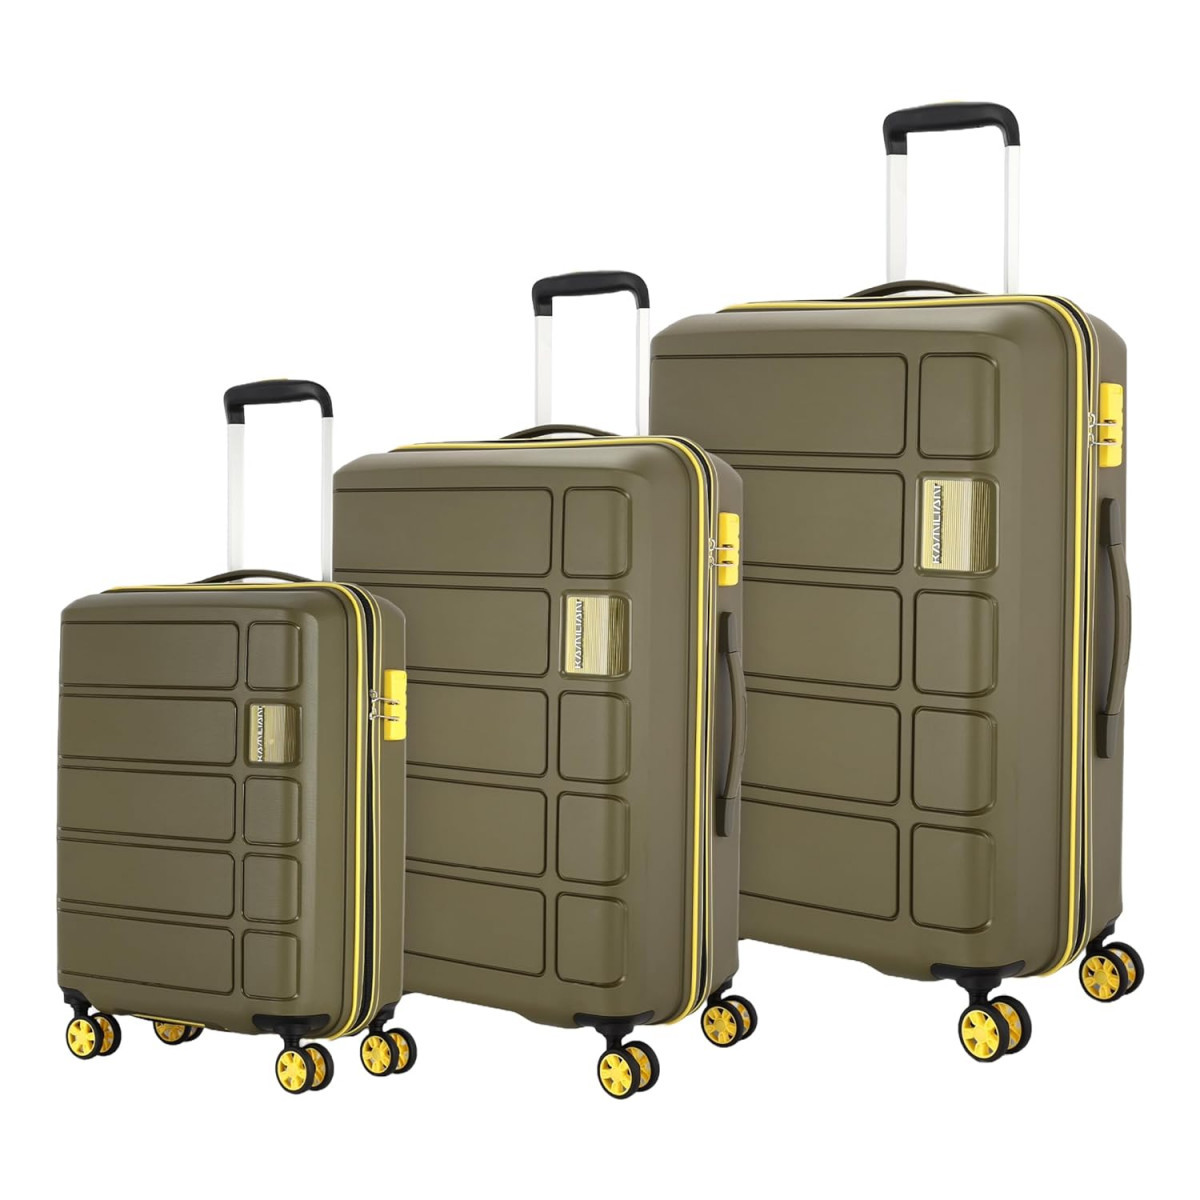 American Tourister Kamiliant Harrier Zing 3 Pc Set 56 cms 68 cms  78 cms- Small Medium  Large PP Hard Sided 8 Wheels Spinner Luggage SetSuitcase SetTrolley Bag Set Miliatry Olive